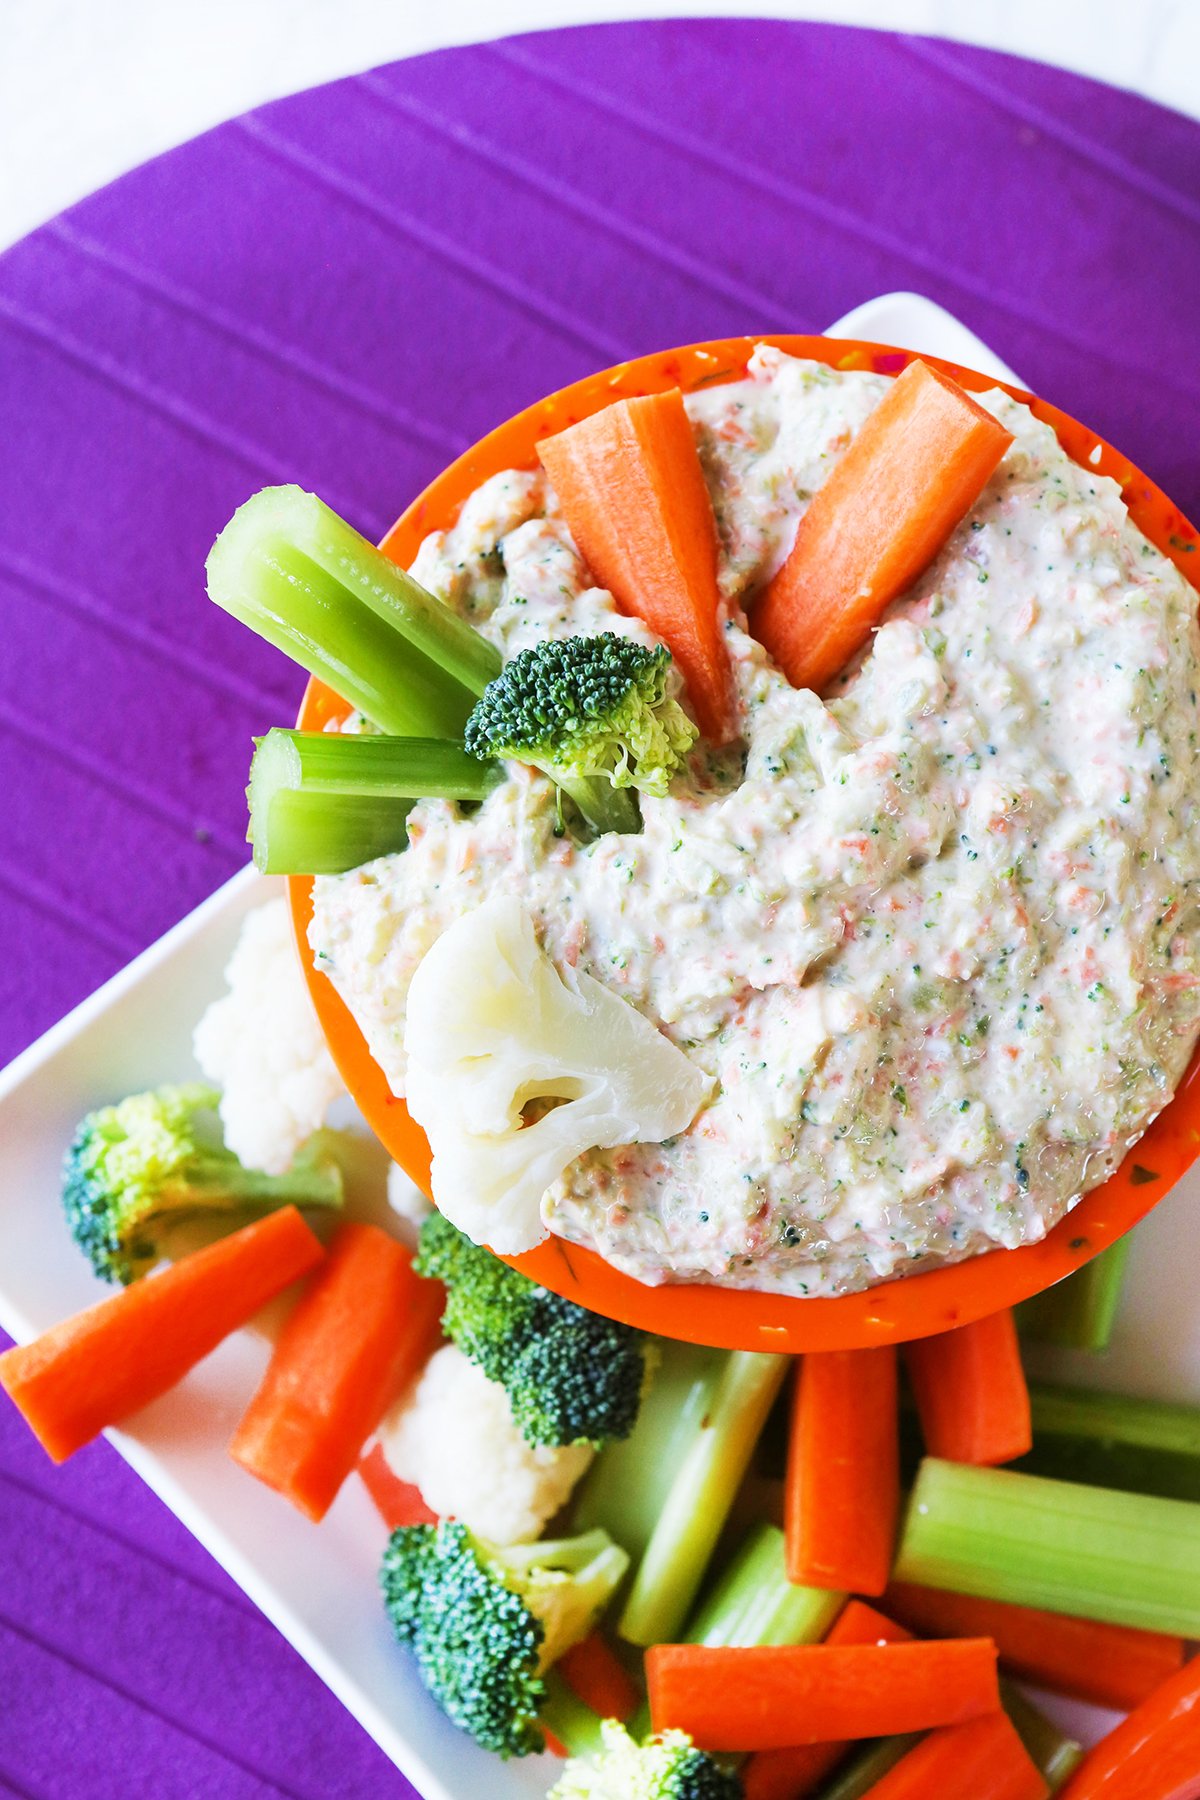 Veggie sticks packed into an orange bowl filled with creamy vegetable dip.